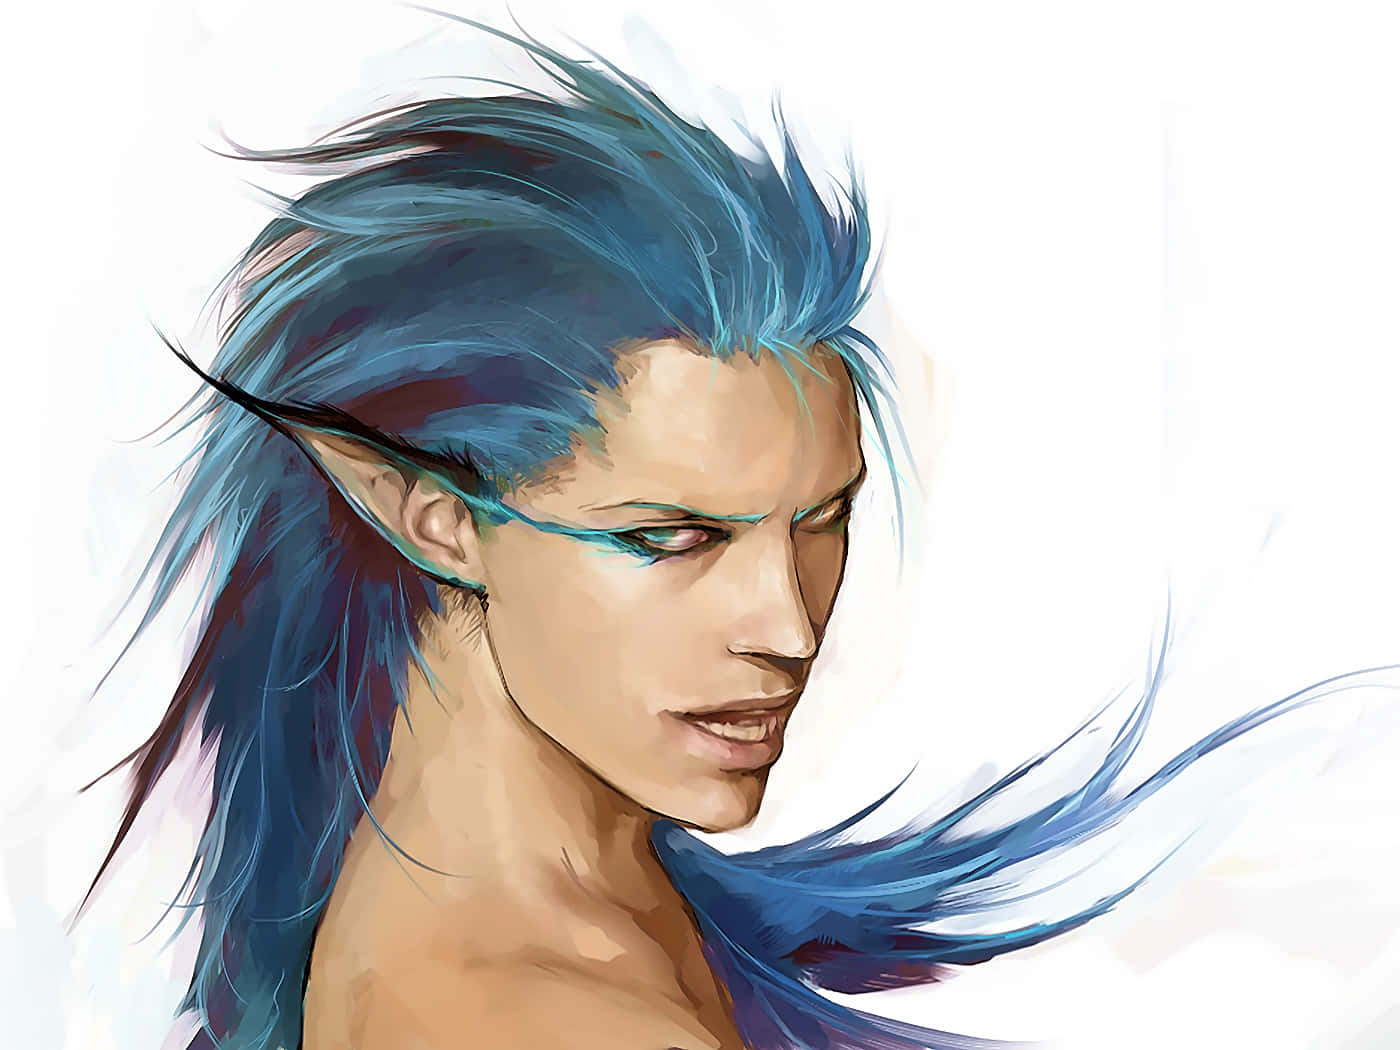 "Grimmjow Jaegerjaquez from the Anime Series Bleach" Wallpaper